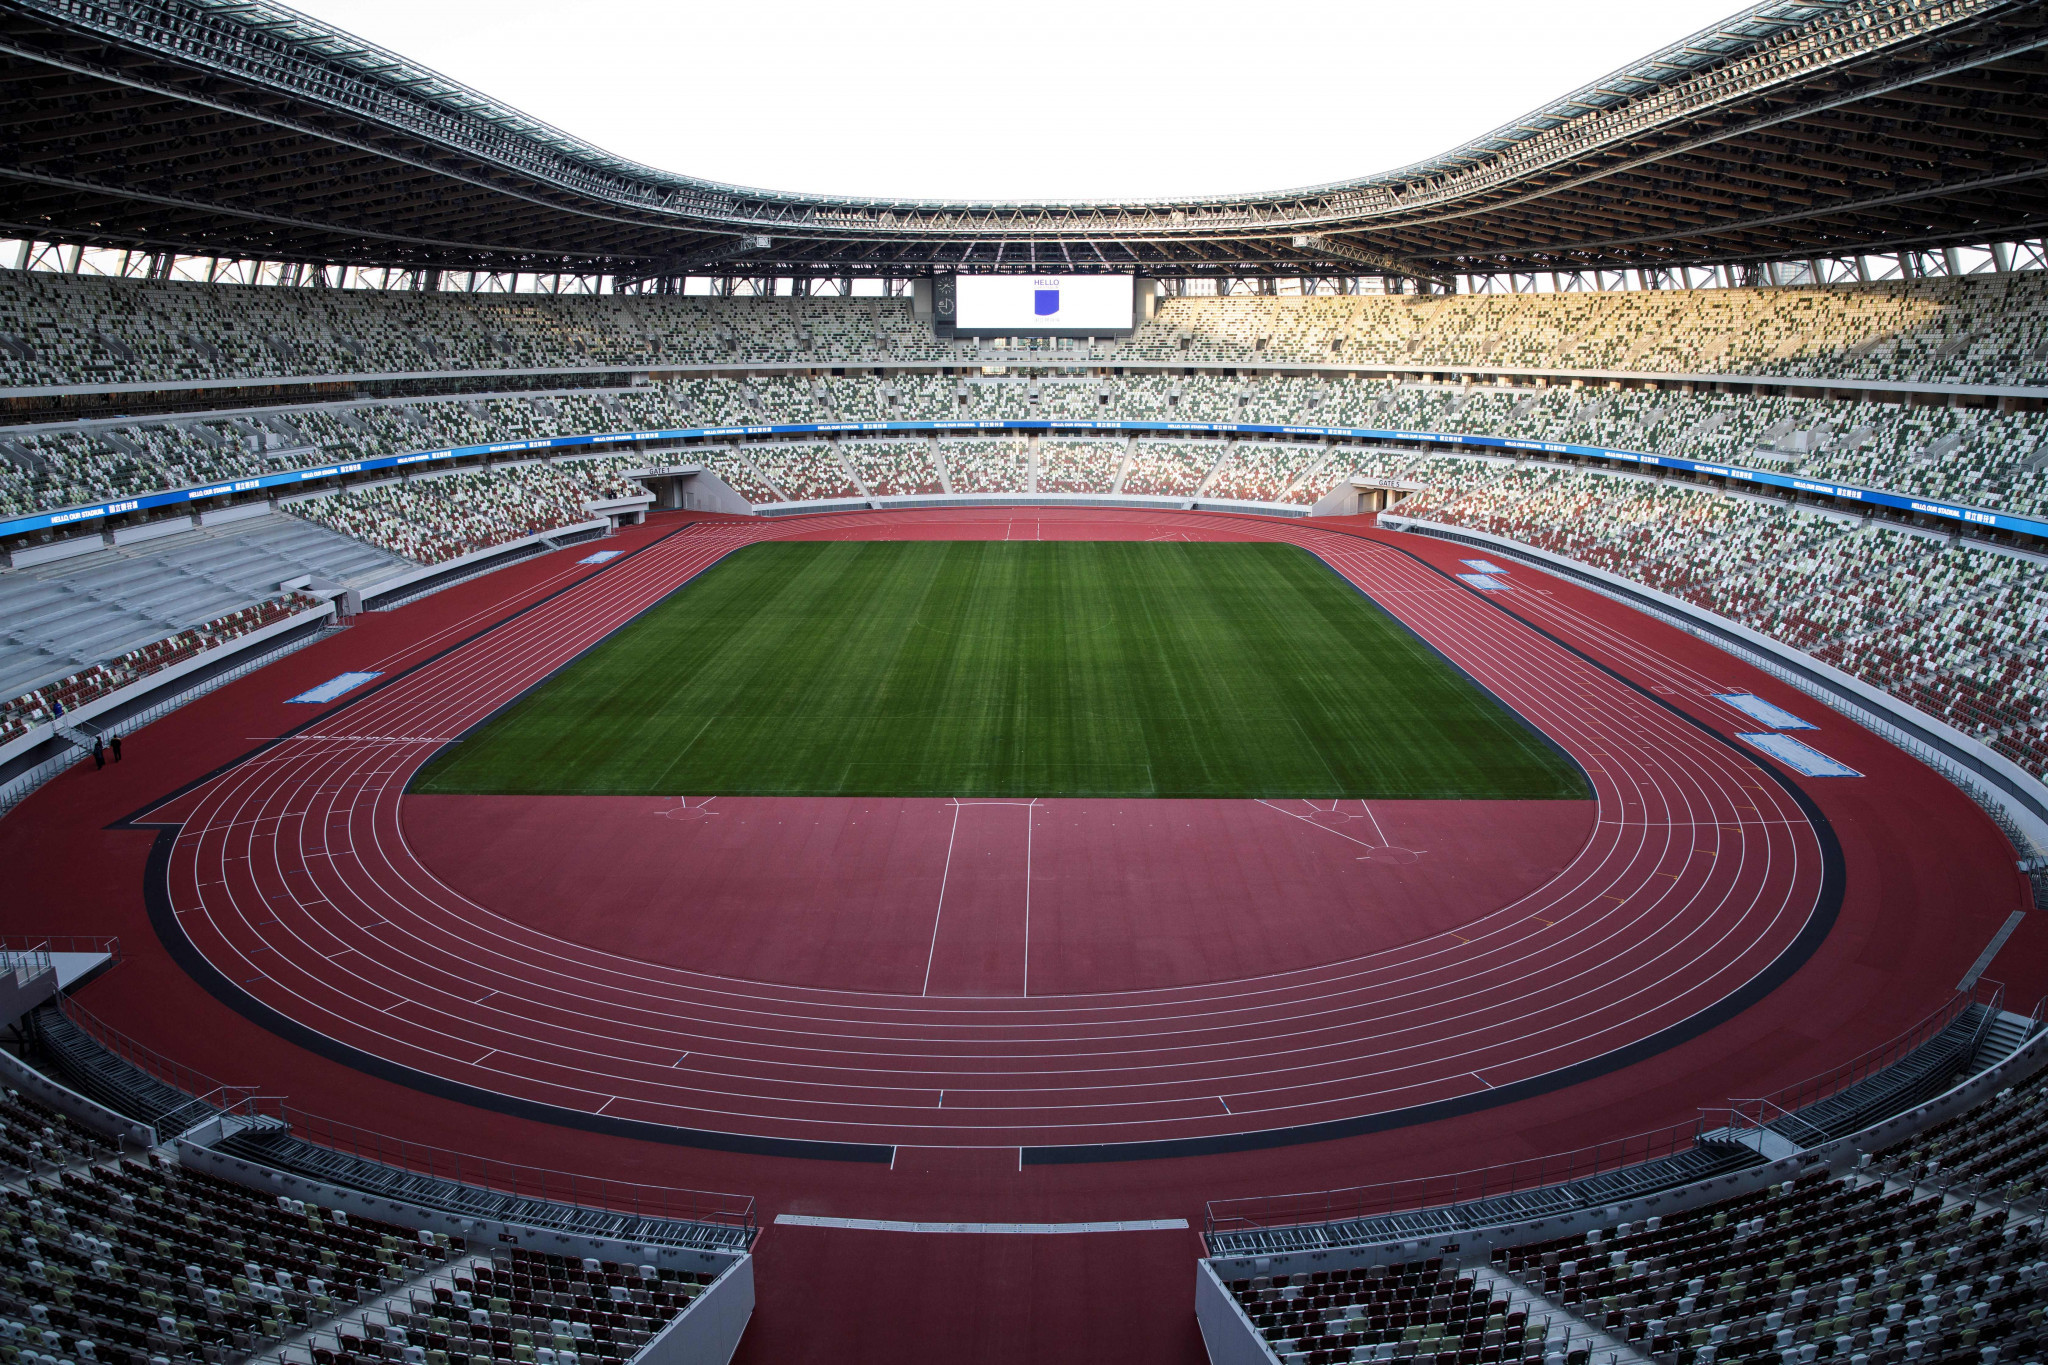 The stadium will be the centrepiece of next year's Olympic and Paralympic Games in Tokyo ©Getty Images